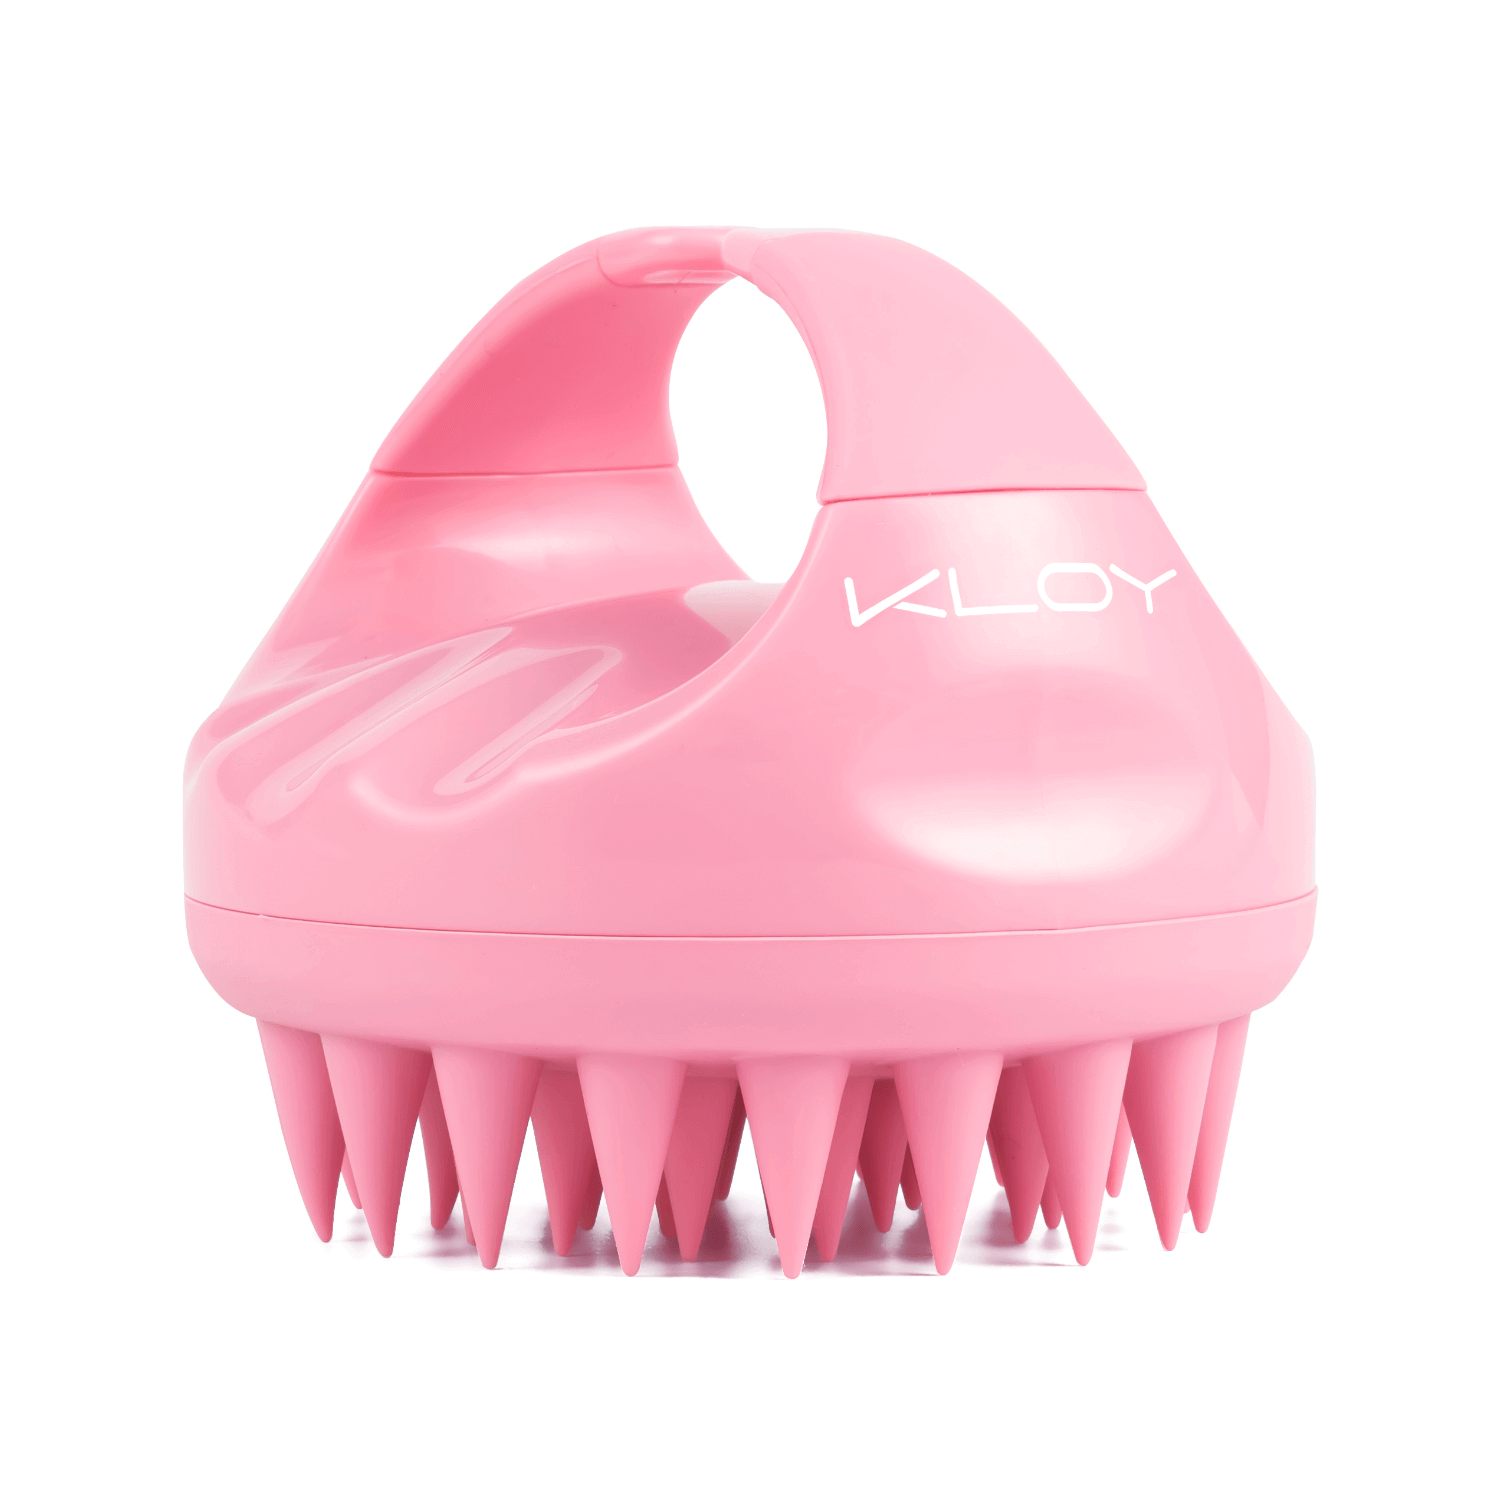 Combo of Kloy Hair Massage Brush - Sky Blue & Pink